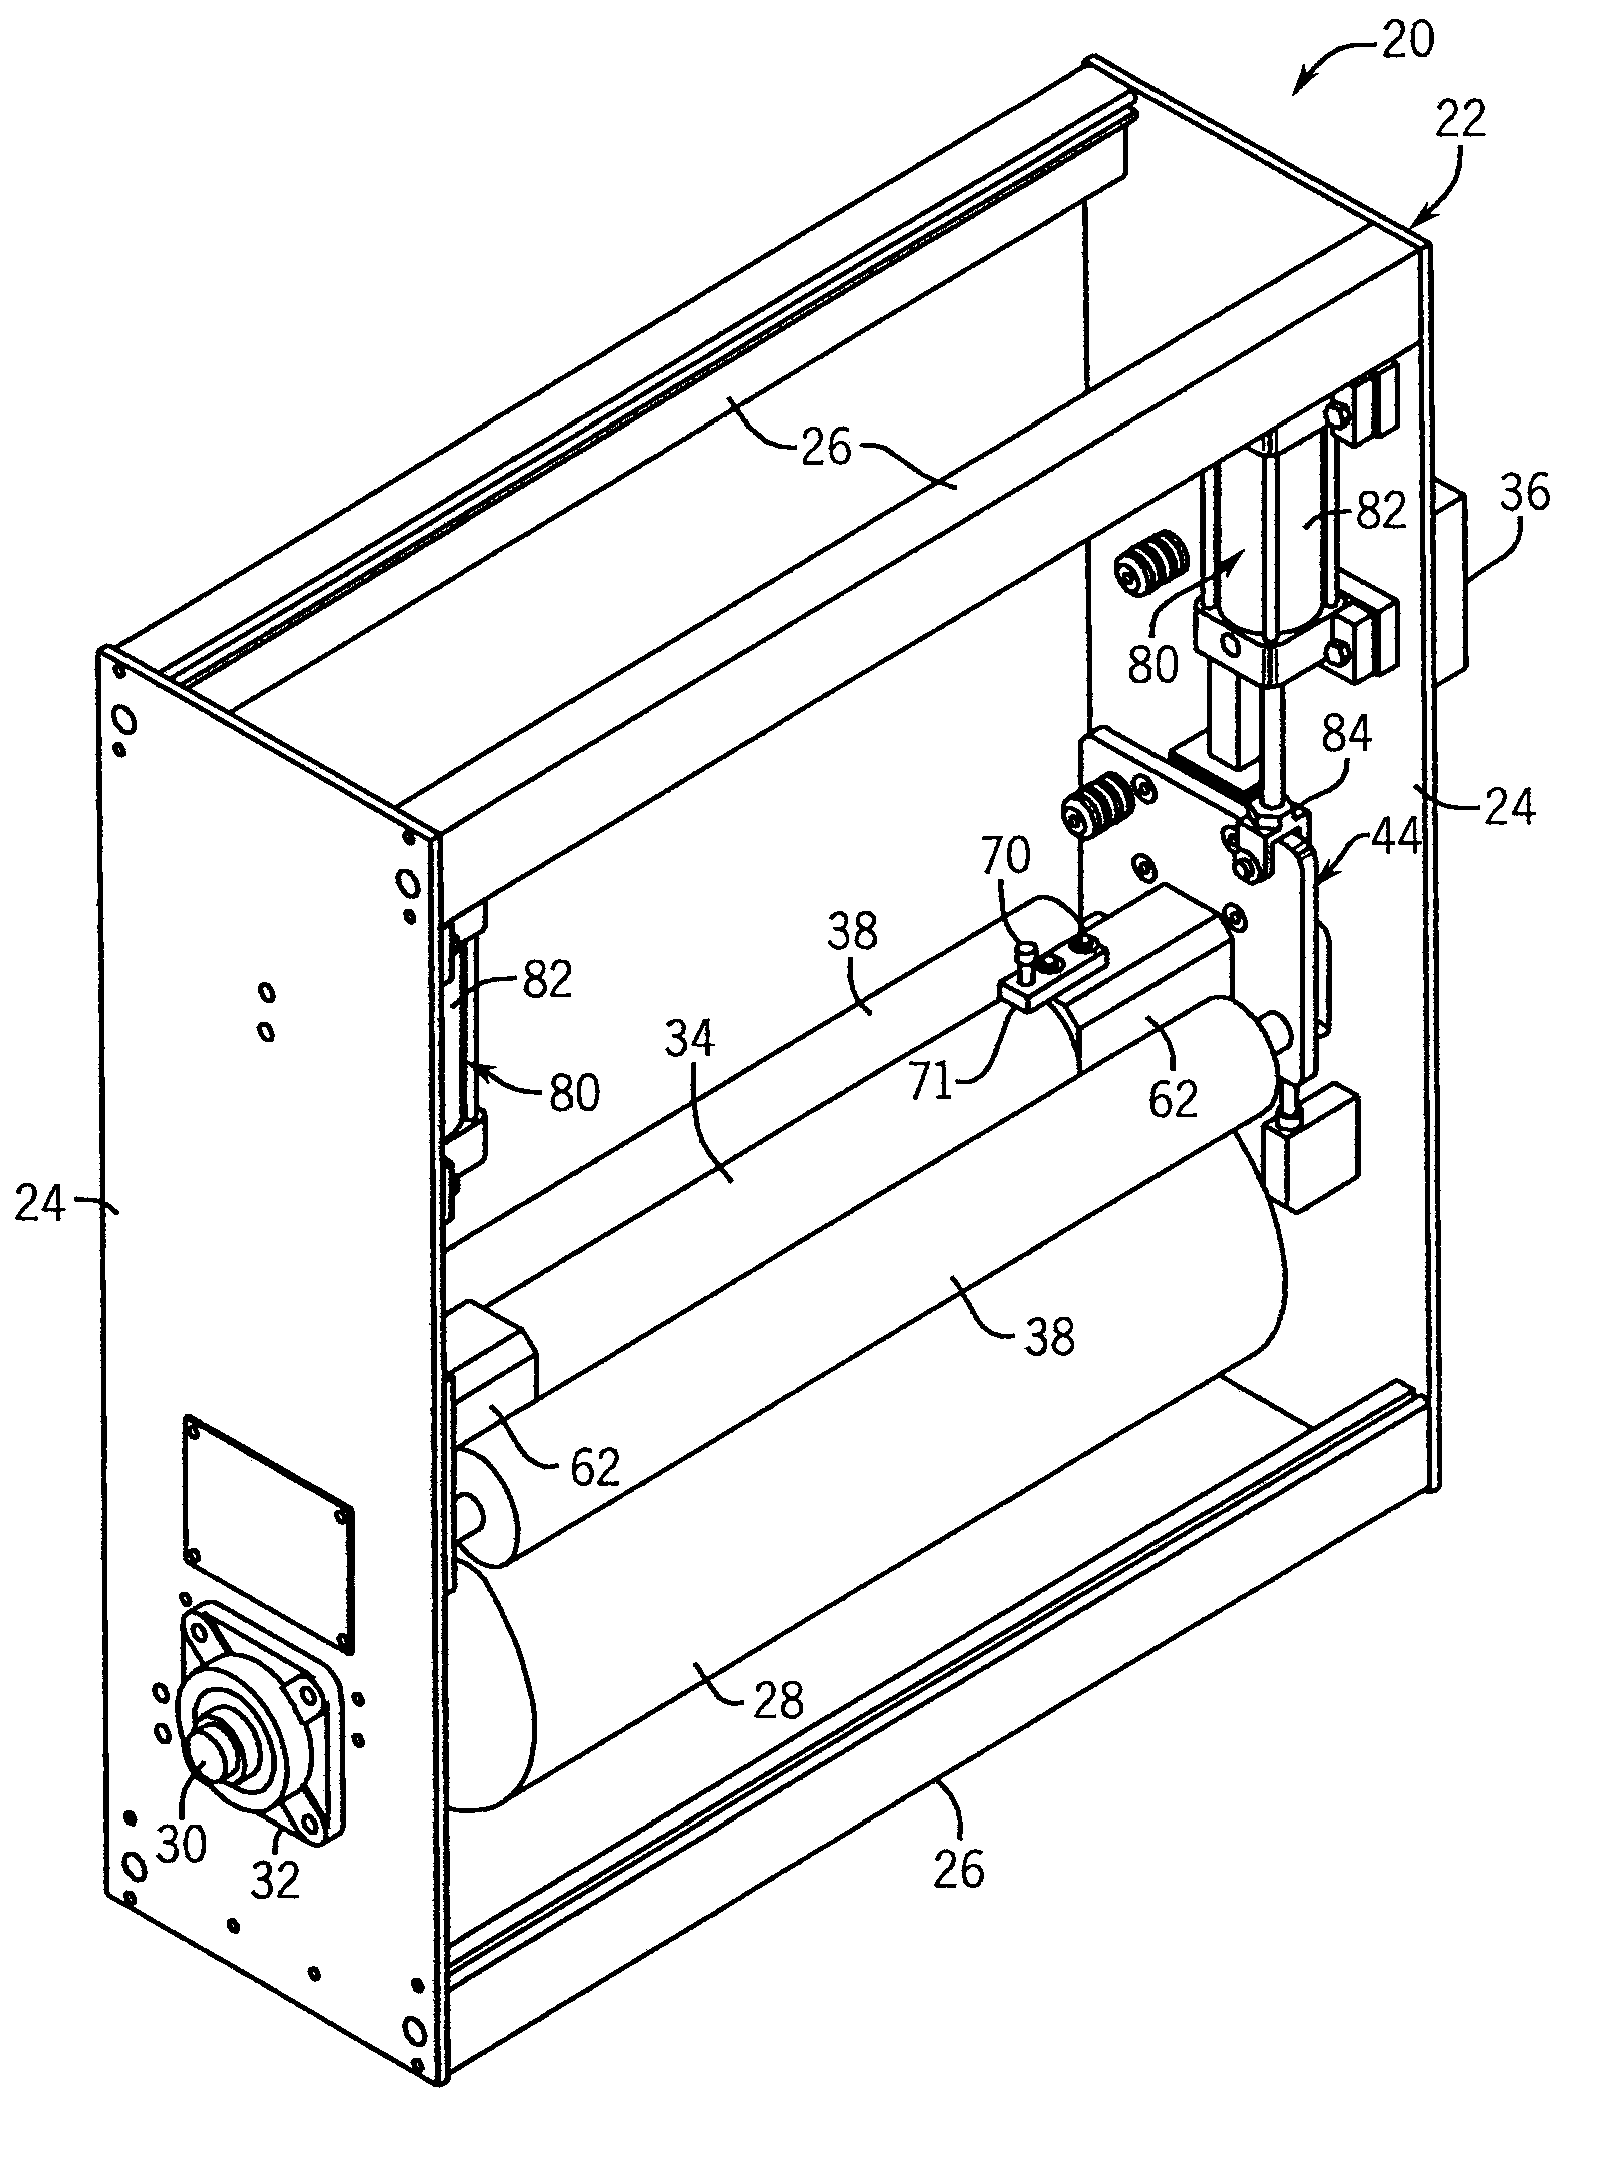 Atmospheric treater with roller confined discharge chamber